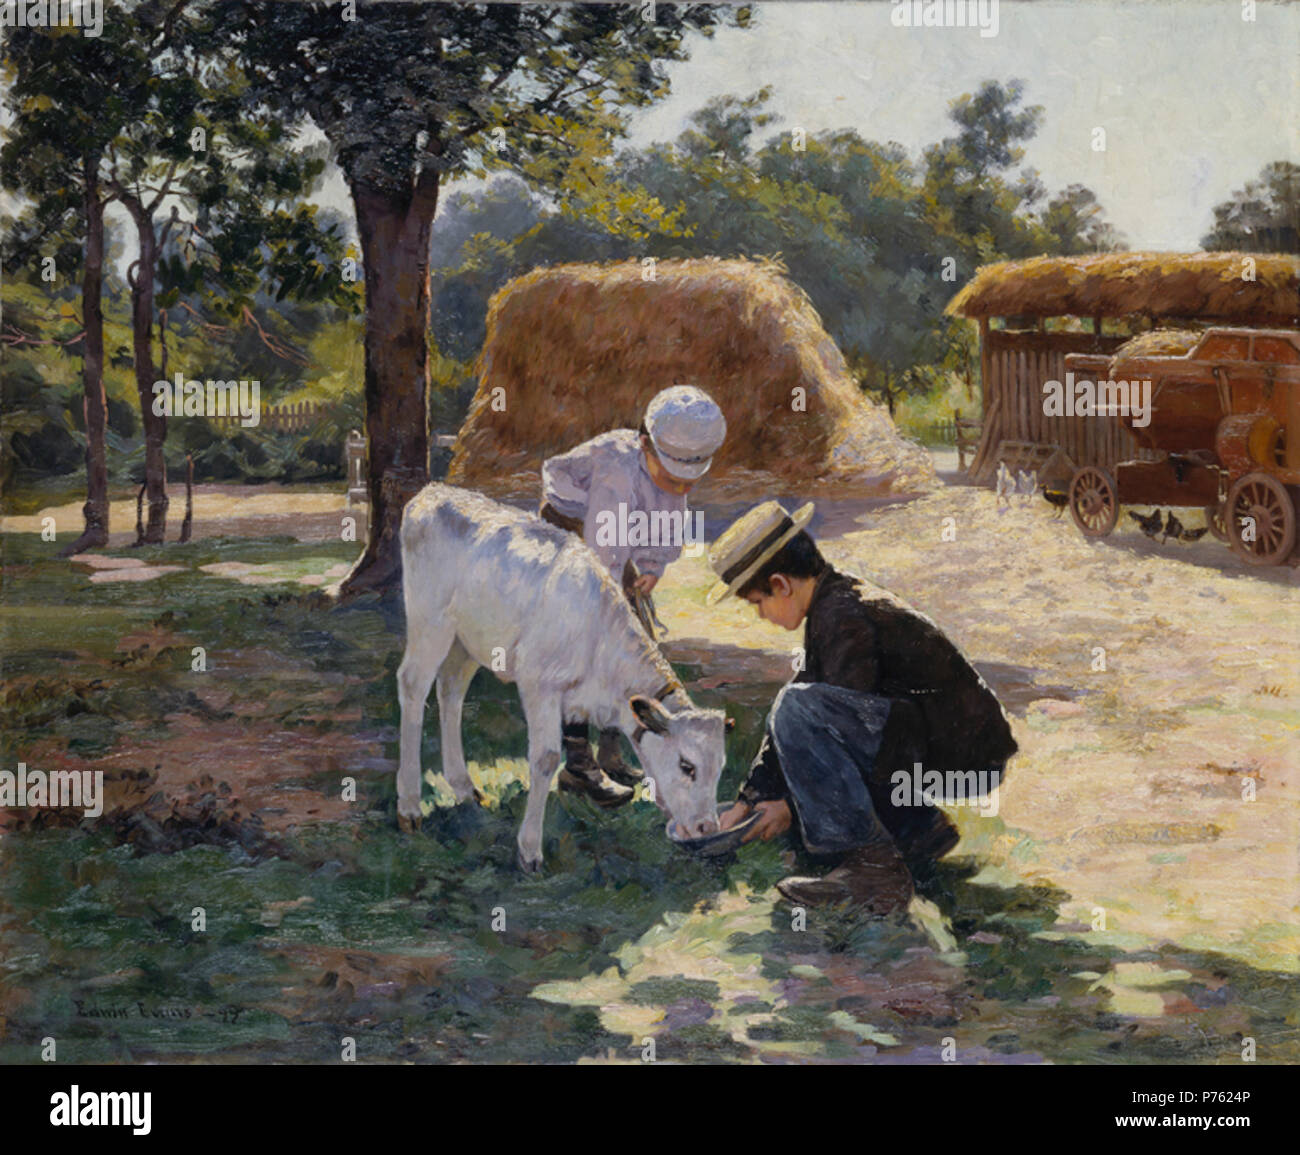 English: The Calf, 1899, oil on canvas, 28 x 34 inches, Brigham Young University Museum of Art . 1899 15 Evans-Calf Stock Photo